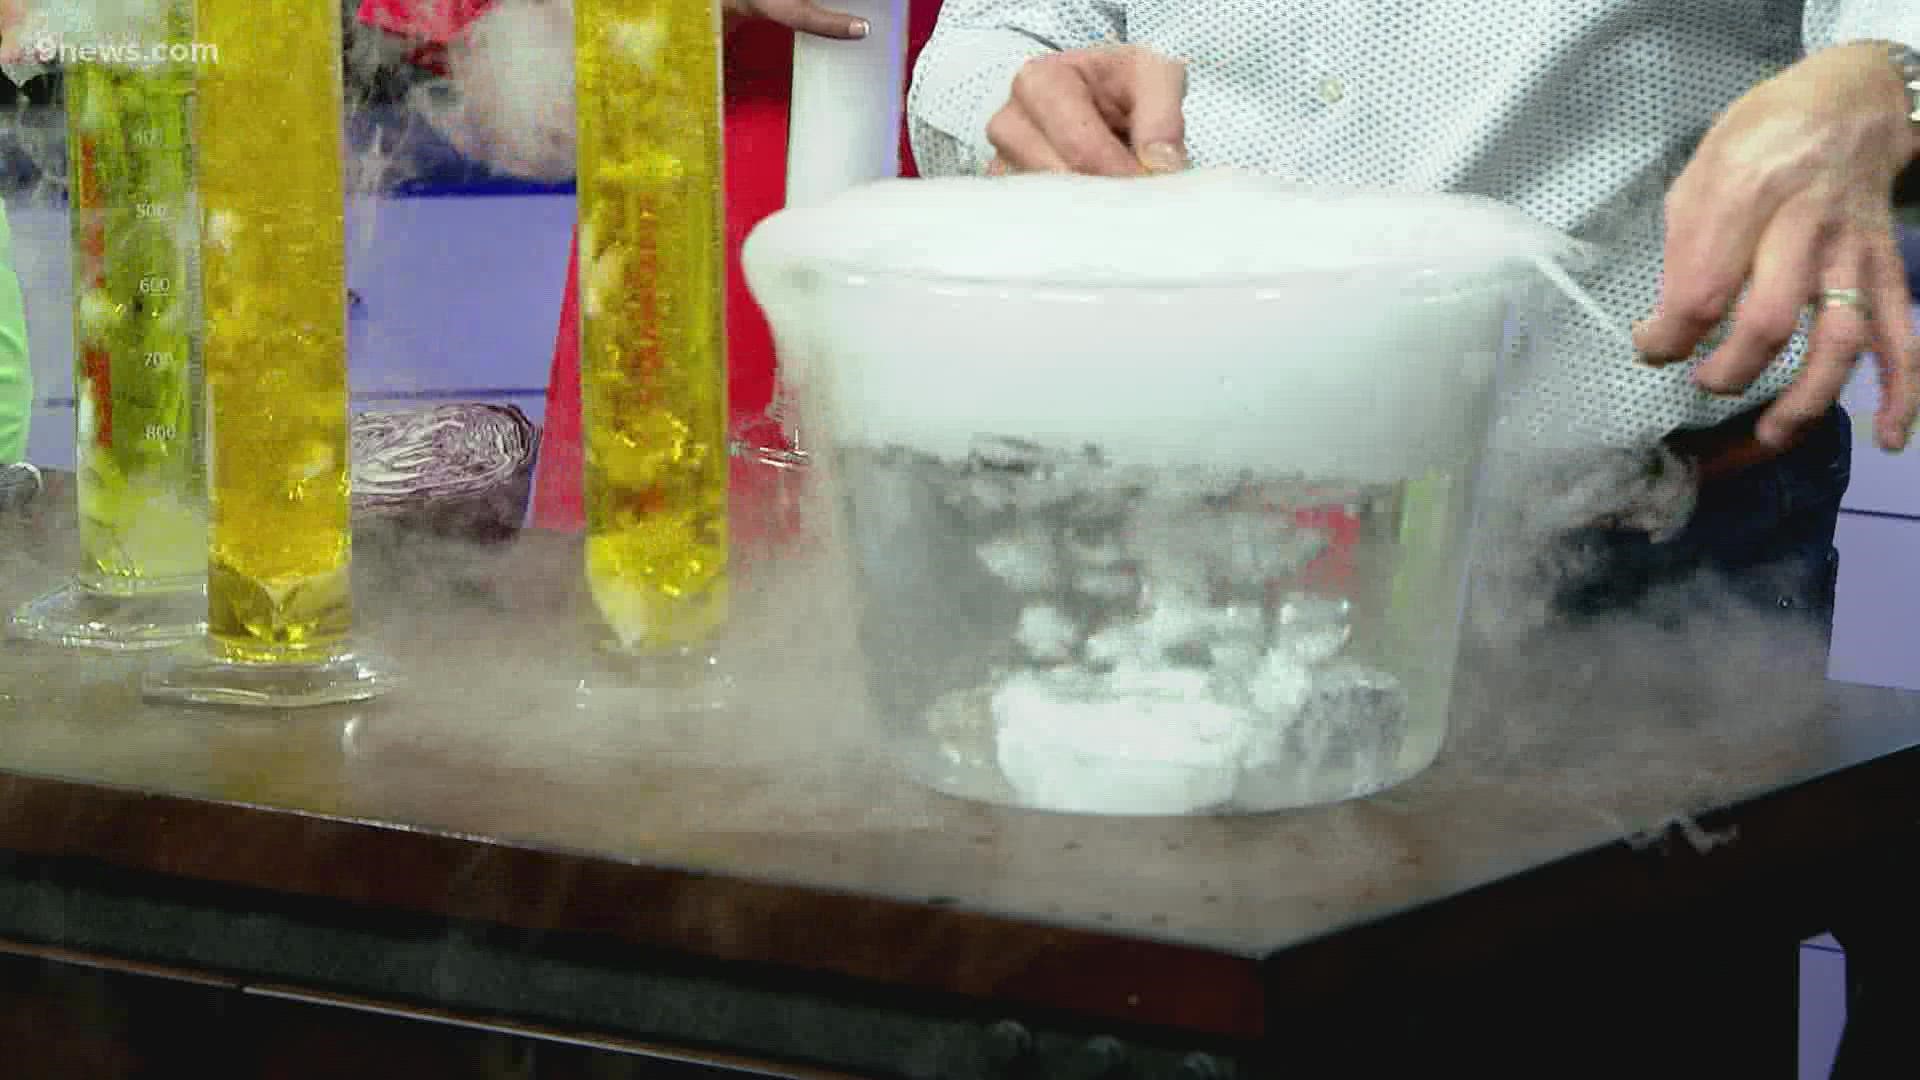 9NEWS Science guy Steve Spangler shows us some fun, easy Halloween experiments.